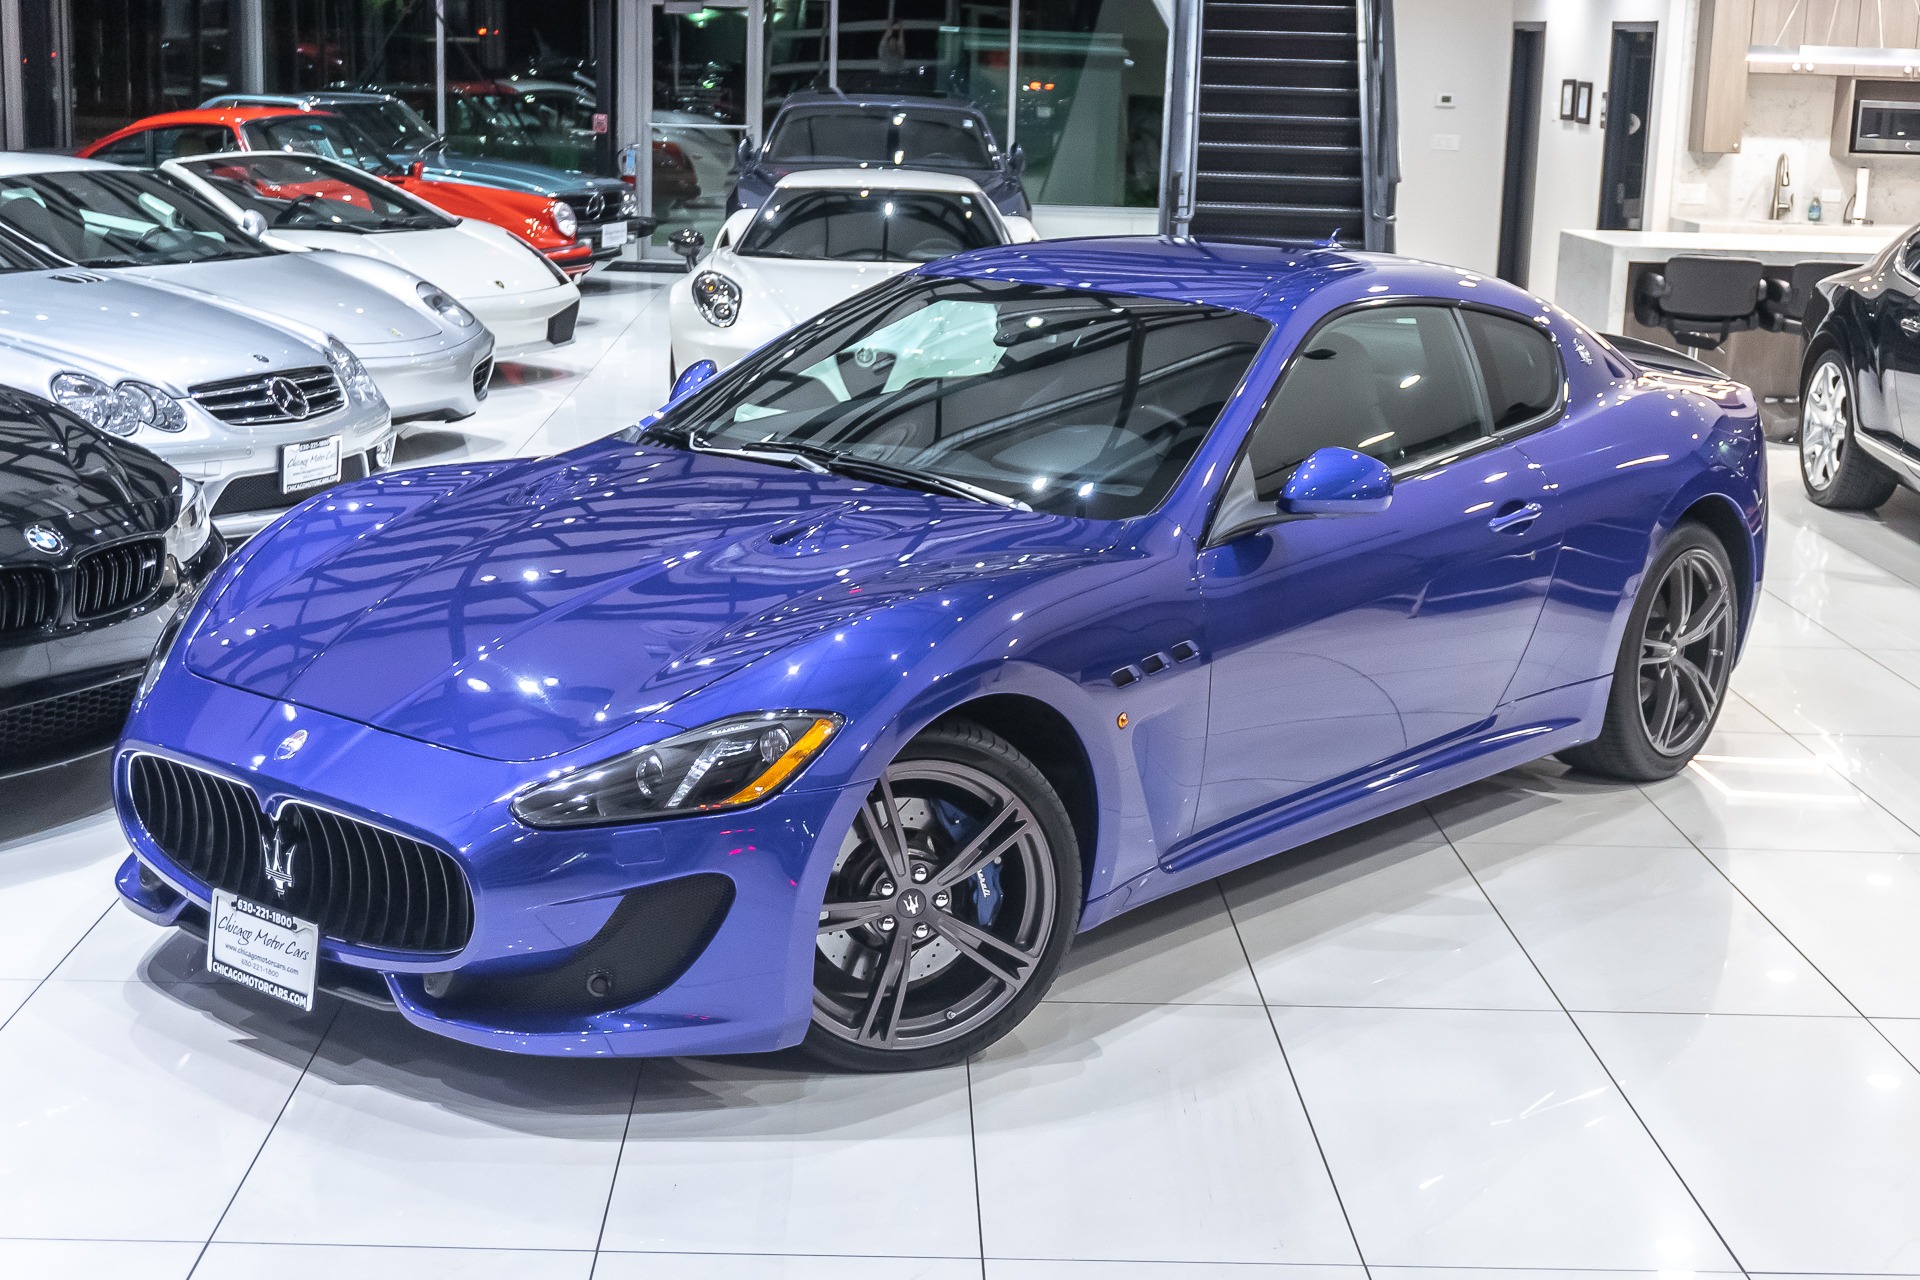 Used 2017 Maserati GranTurismo Sport Coupe MSRP $149K+ For Sale (Special  Pricing) | Chicago Motor Cars Stock #16098